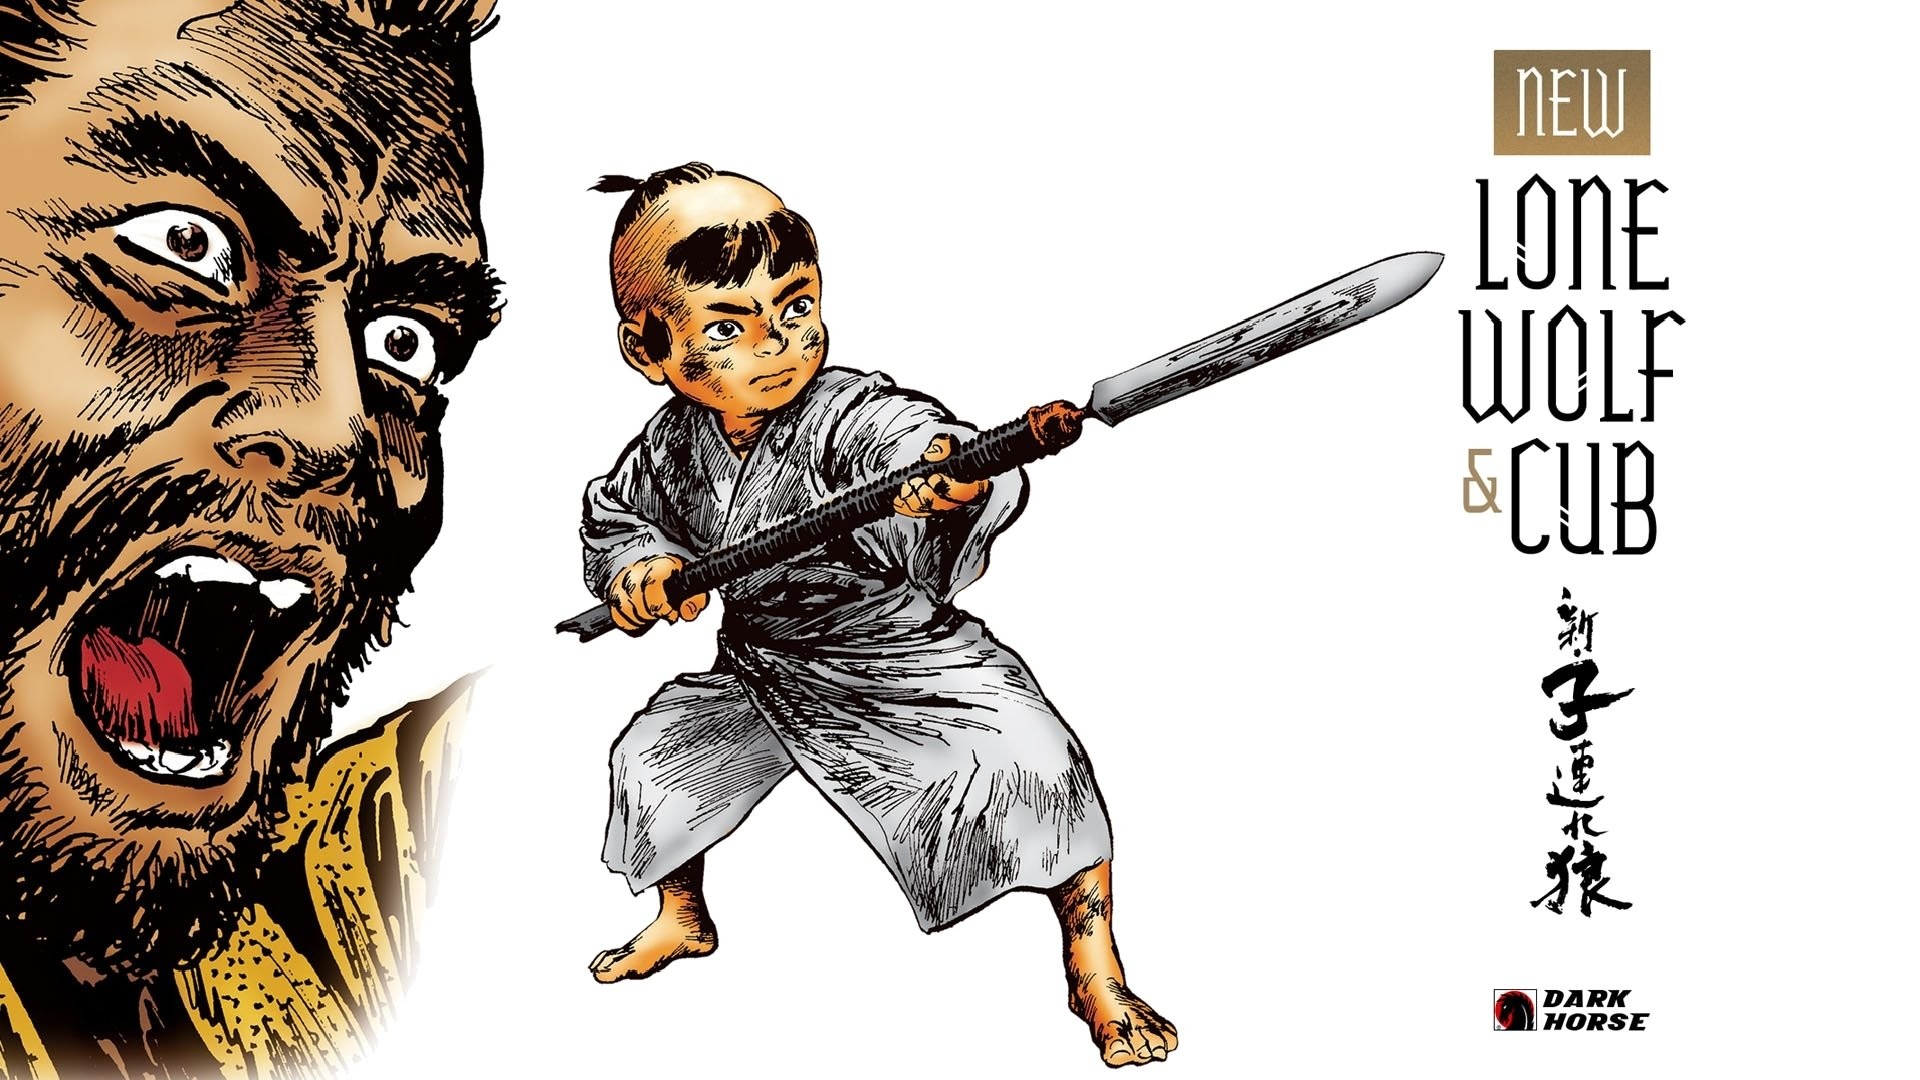 Lone Wolf And Cub / Lone Wolf and Cub | Wiki | Anime Amino : In the feudal era of japan, ogami itto is the elite executioner for the shogun until the ruthless yagyu clan frames him in an attempt to gain the position.